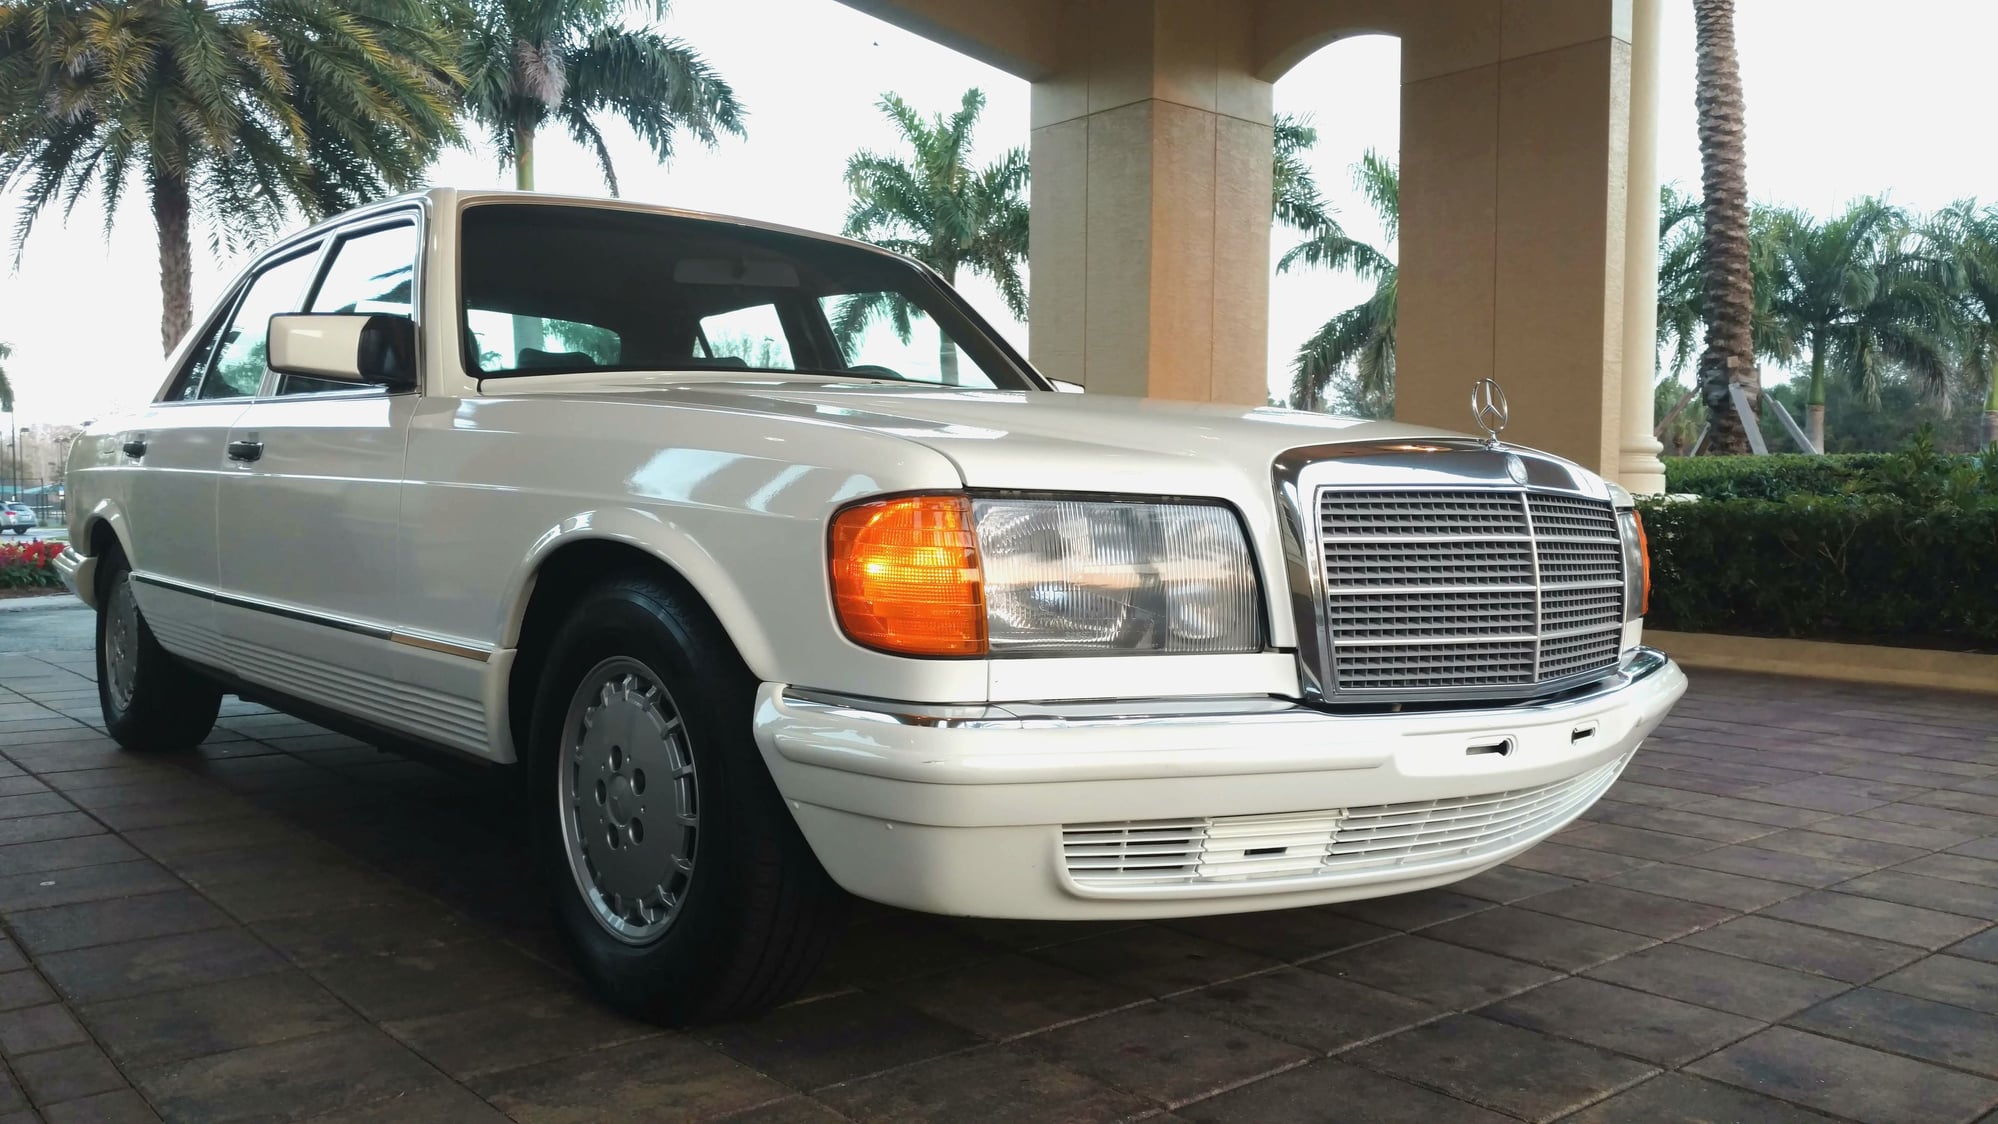 1983 Mercedes-Benz 380SEL - 1983 5-speed manual, Euro 280SE AMG (Documented) - Used - VIN 00000000000000000 - 64,949 Miles - 6 cyl - 2WD - Manual - Sedan - White - Fort Myers, FL 33913, United States